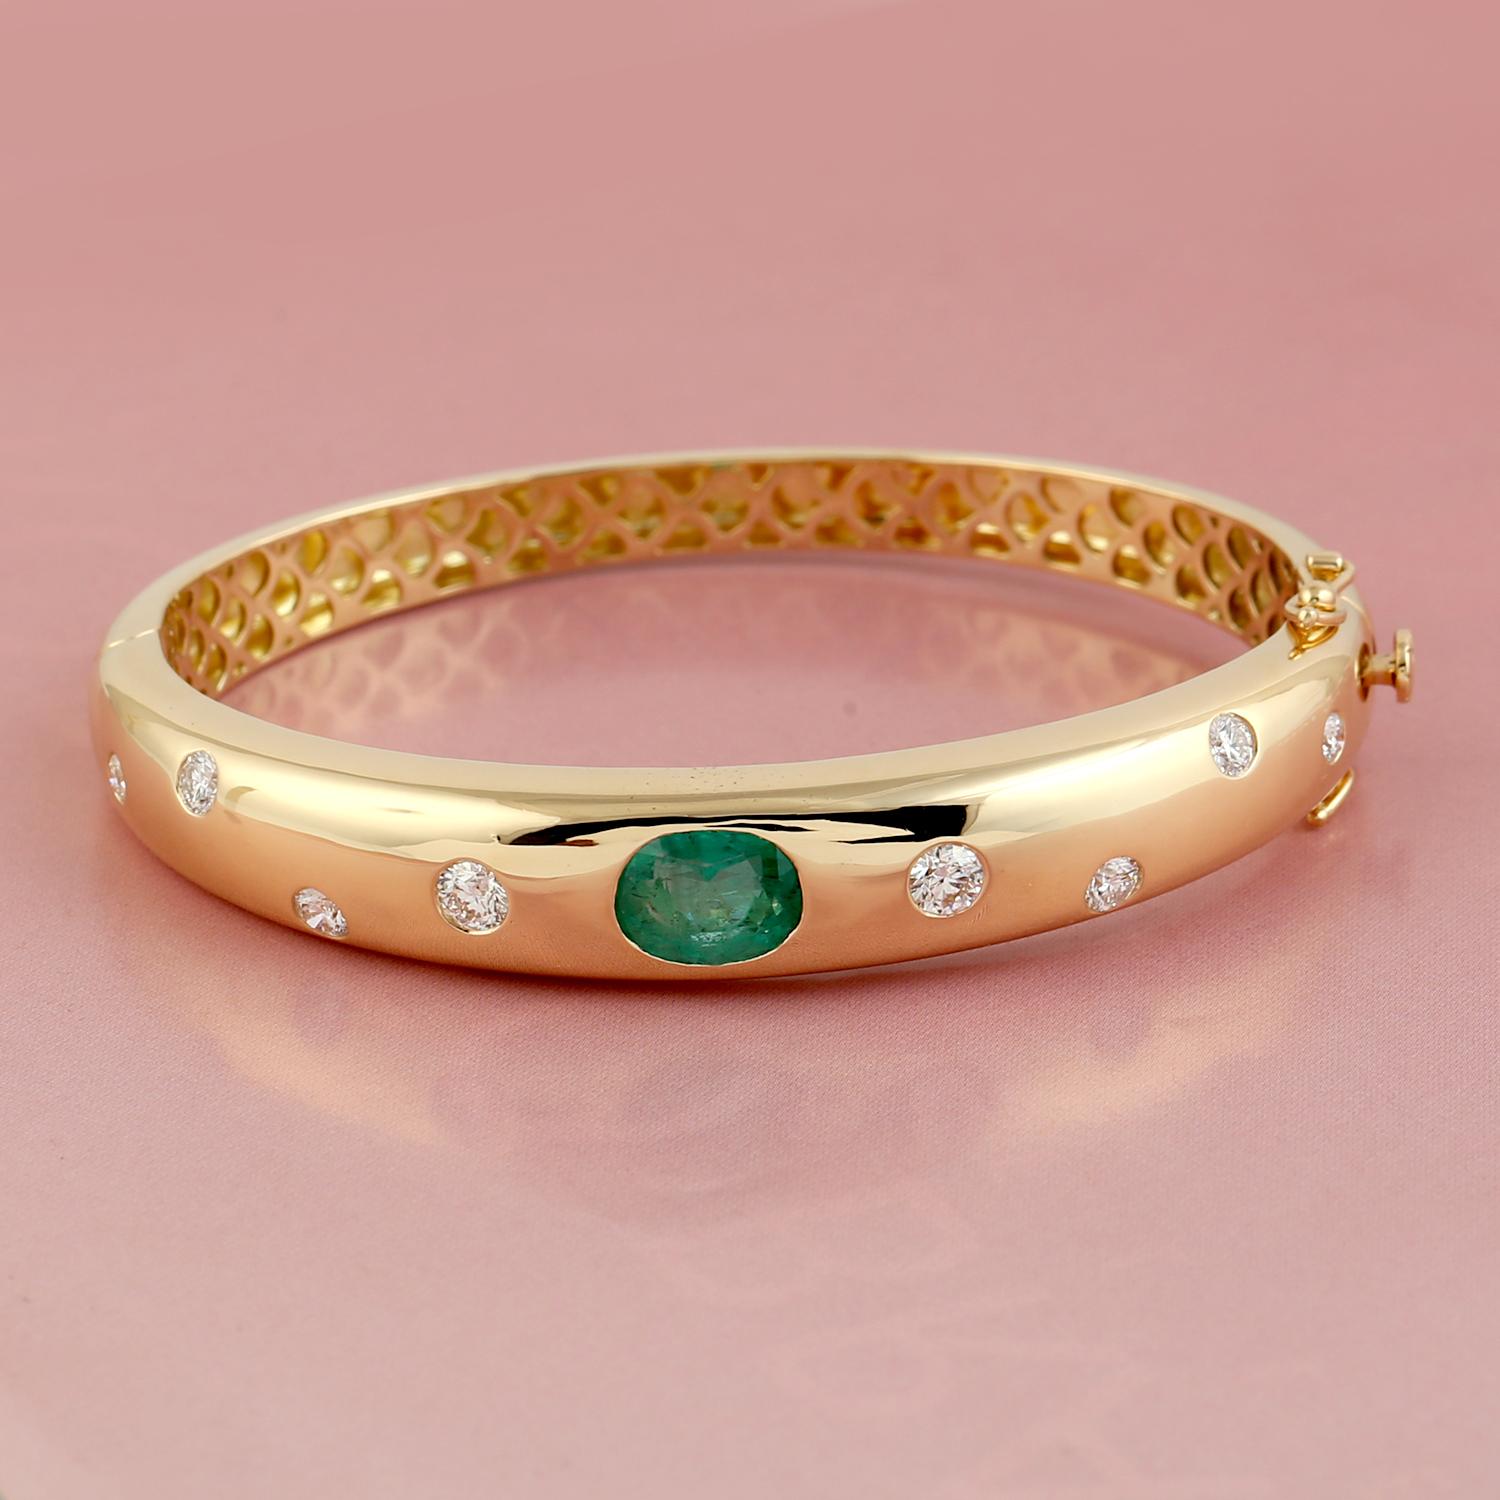 A stunning bracelet handmade in 14K yellow gold. It is handset in 2.05 carats emerald and .97 carats of sparkling diamonds. Wear it alone or stack it with your favorite pieces.

FOLLOW MEGHNA JEWELS storefront to view the latest collection &